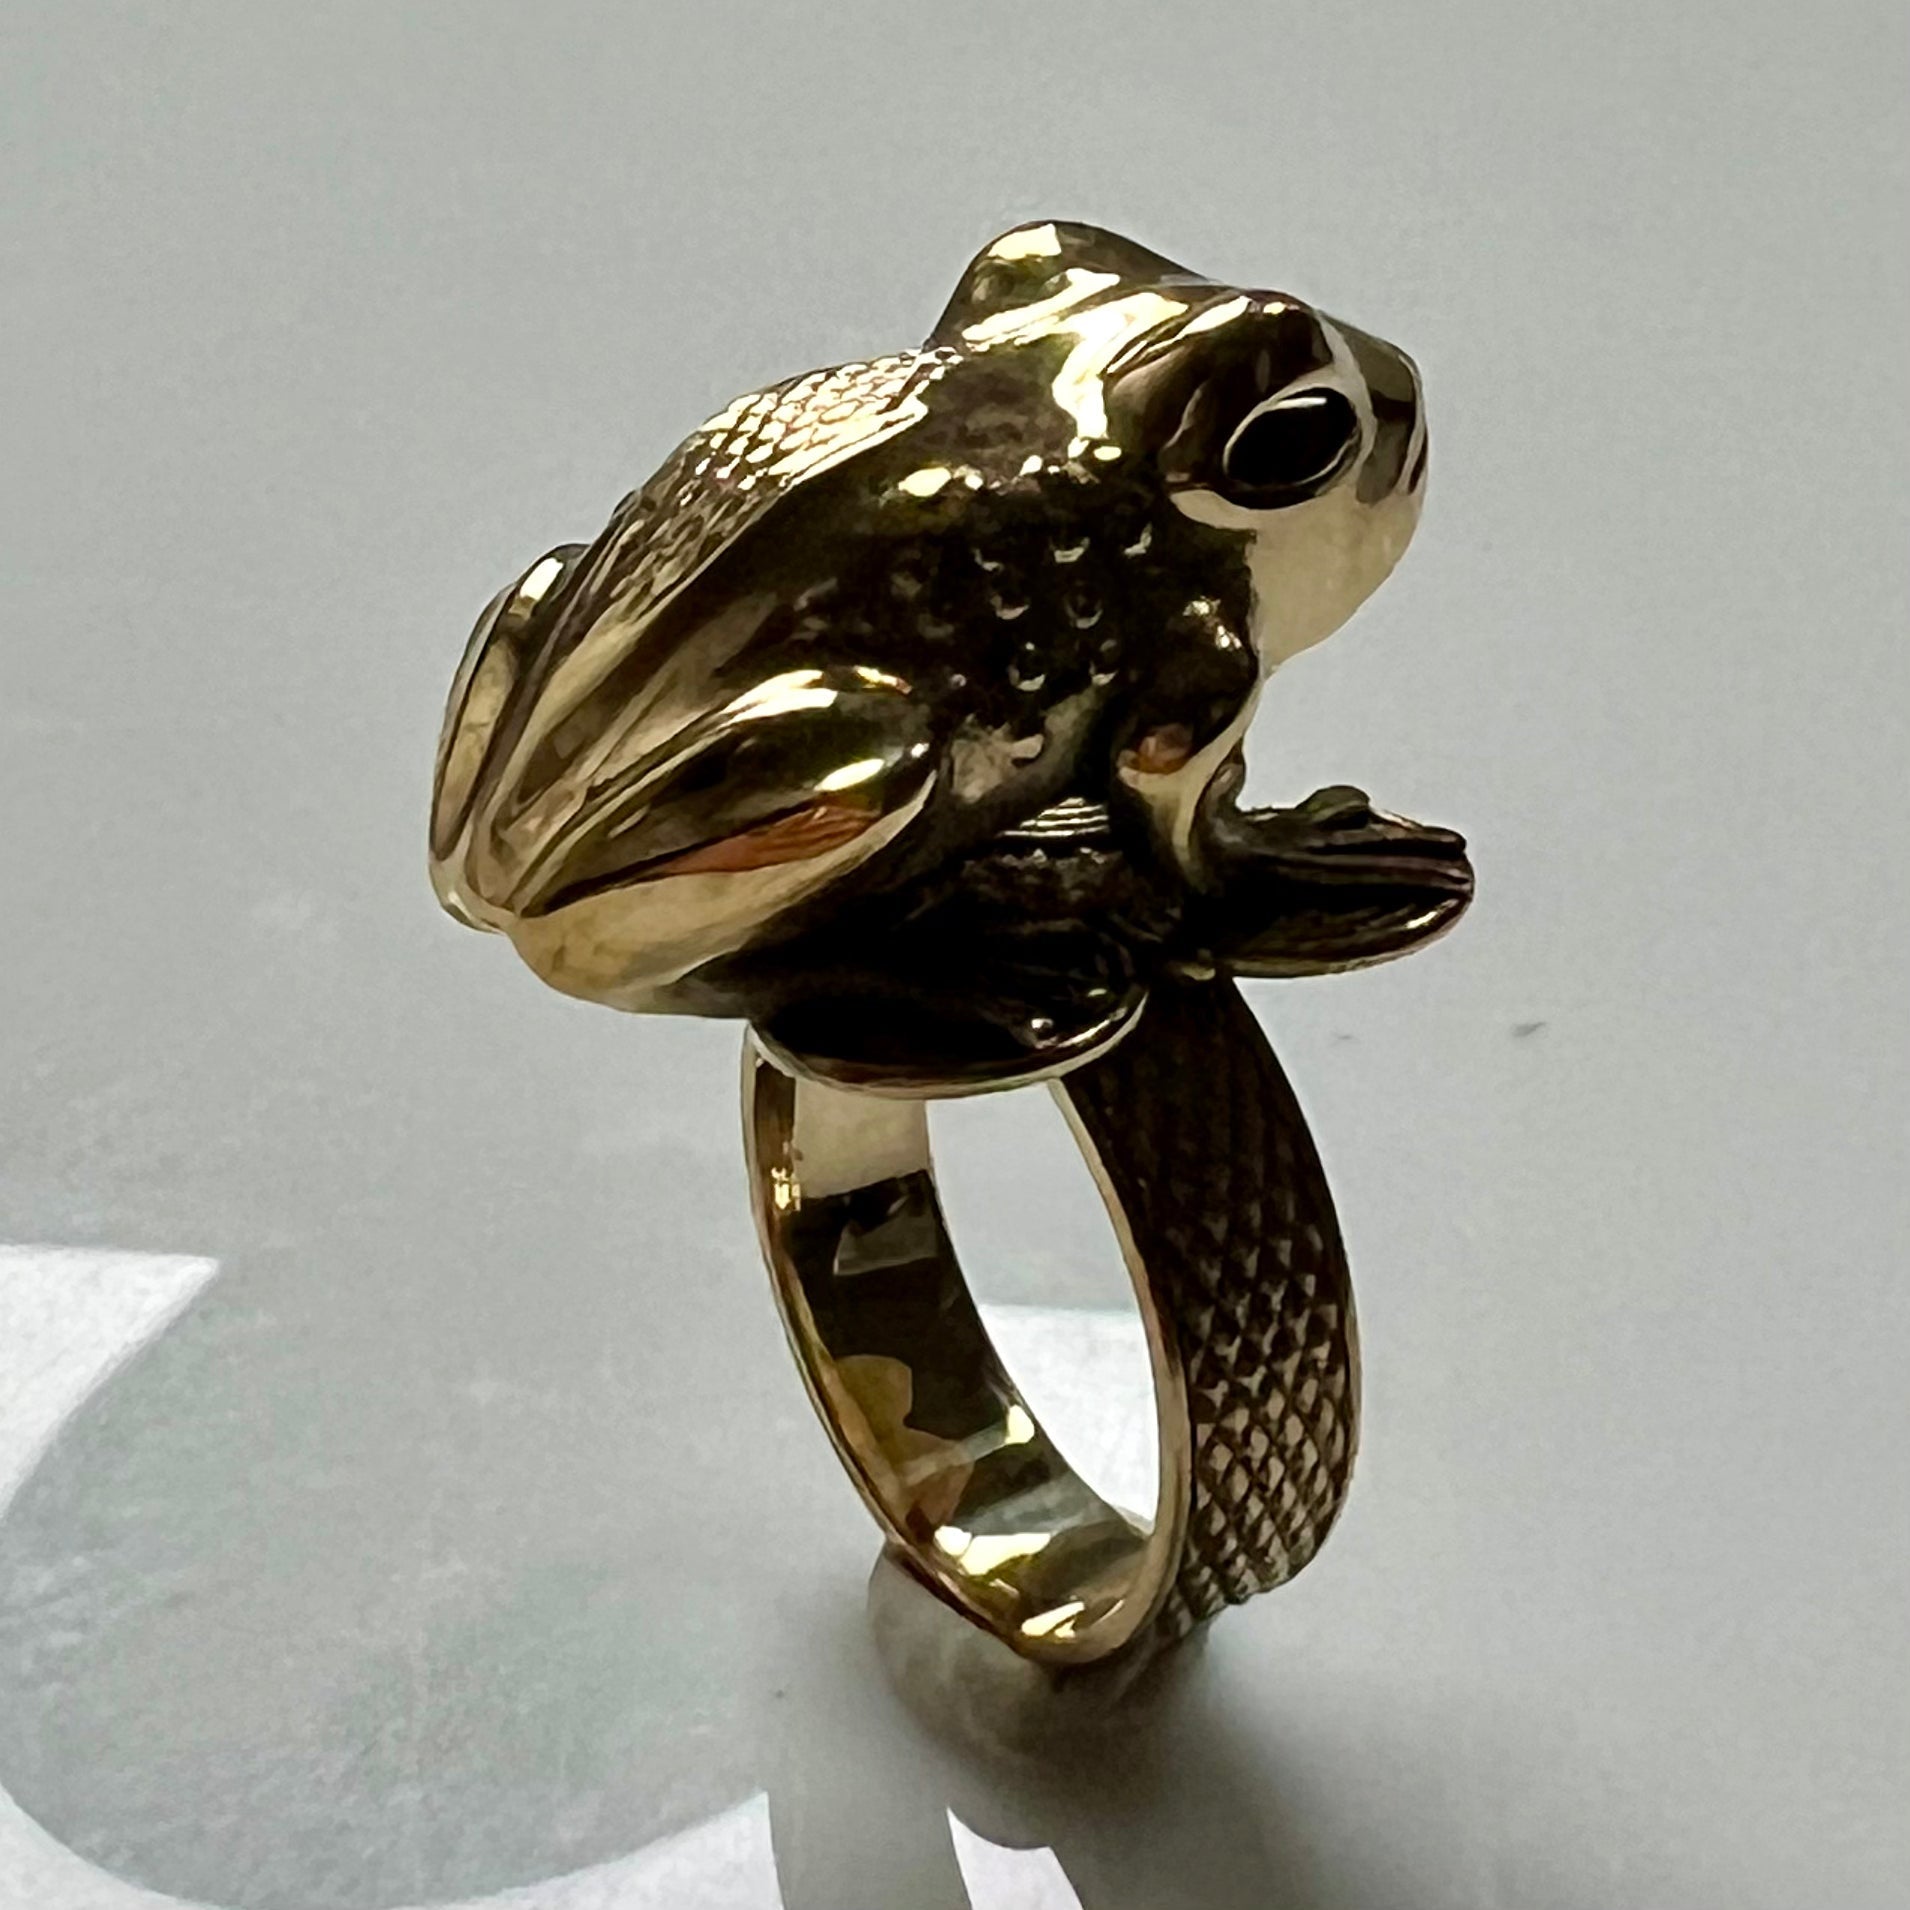 Asante Frog Mpetea (Chief's Ring) - Brass